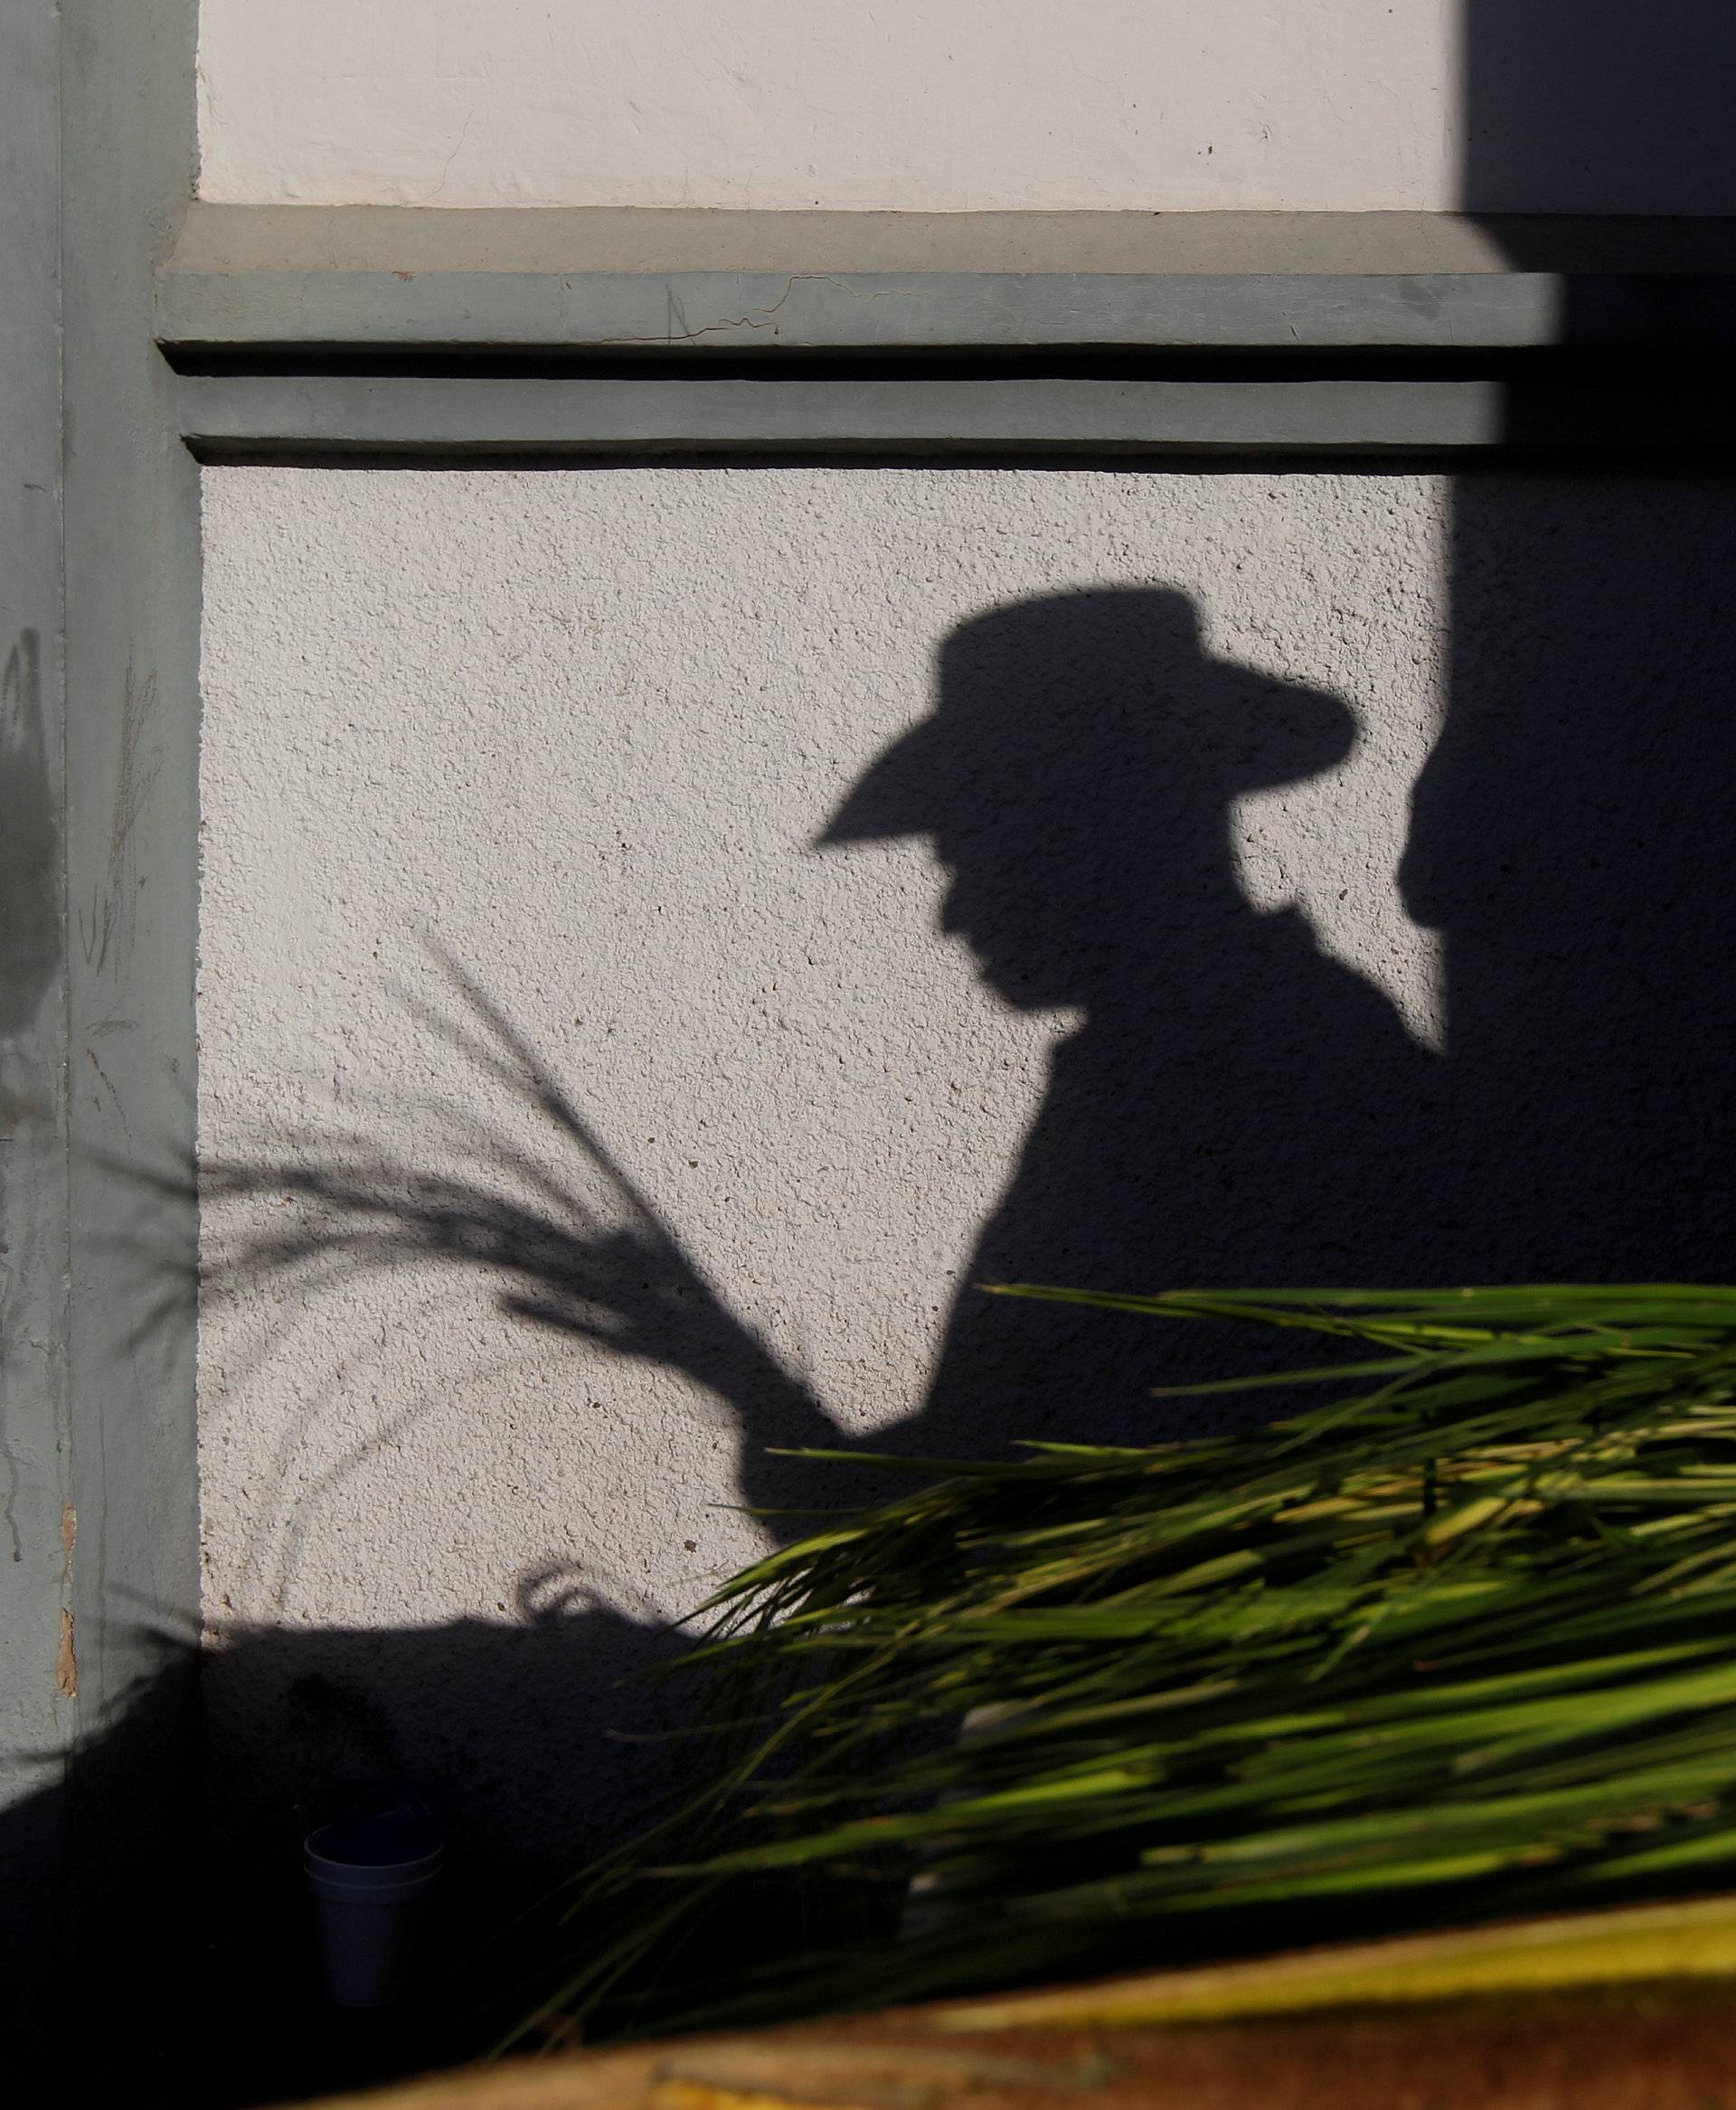 Man casts his shadow while holding palm branches during celebrations for what Hondurans believe to be the 270th anniversary of the discovery of the statue of Virgin of Suyapa, the patron saint of Honduras, in Tegucigalpa